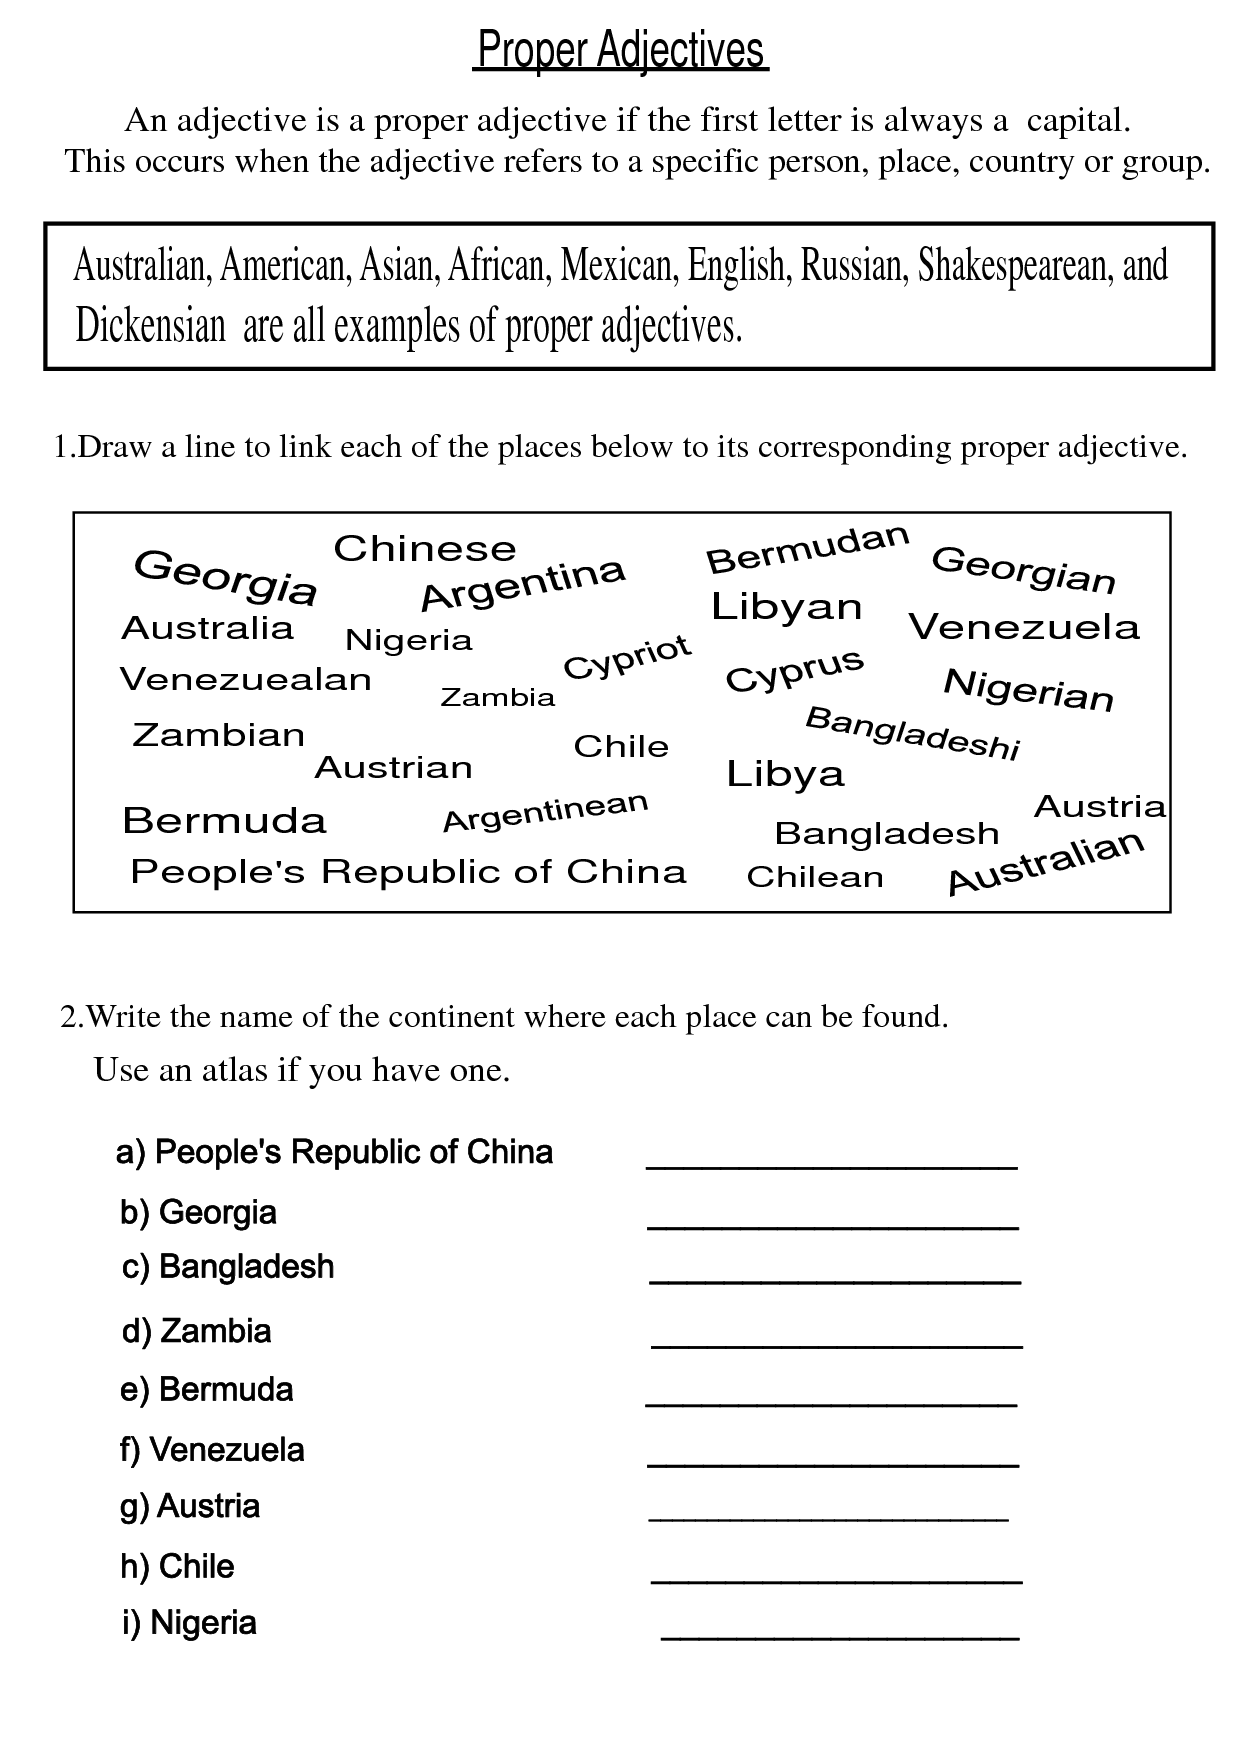 Adjectives Worksheet For Grade 5 With Answers